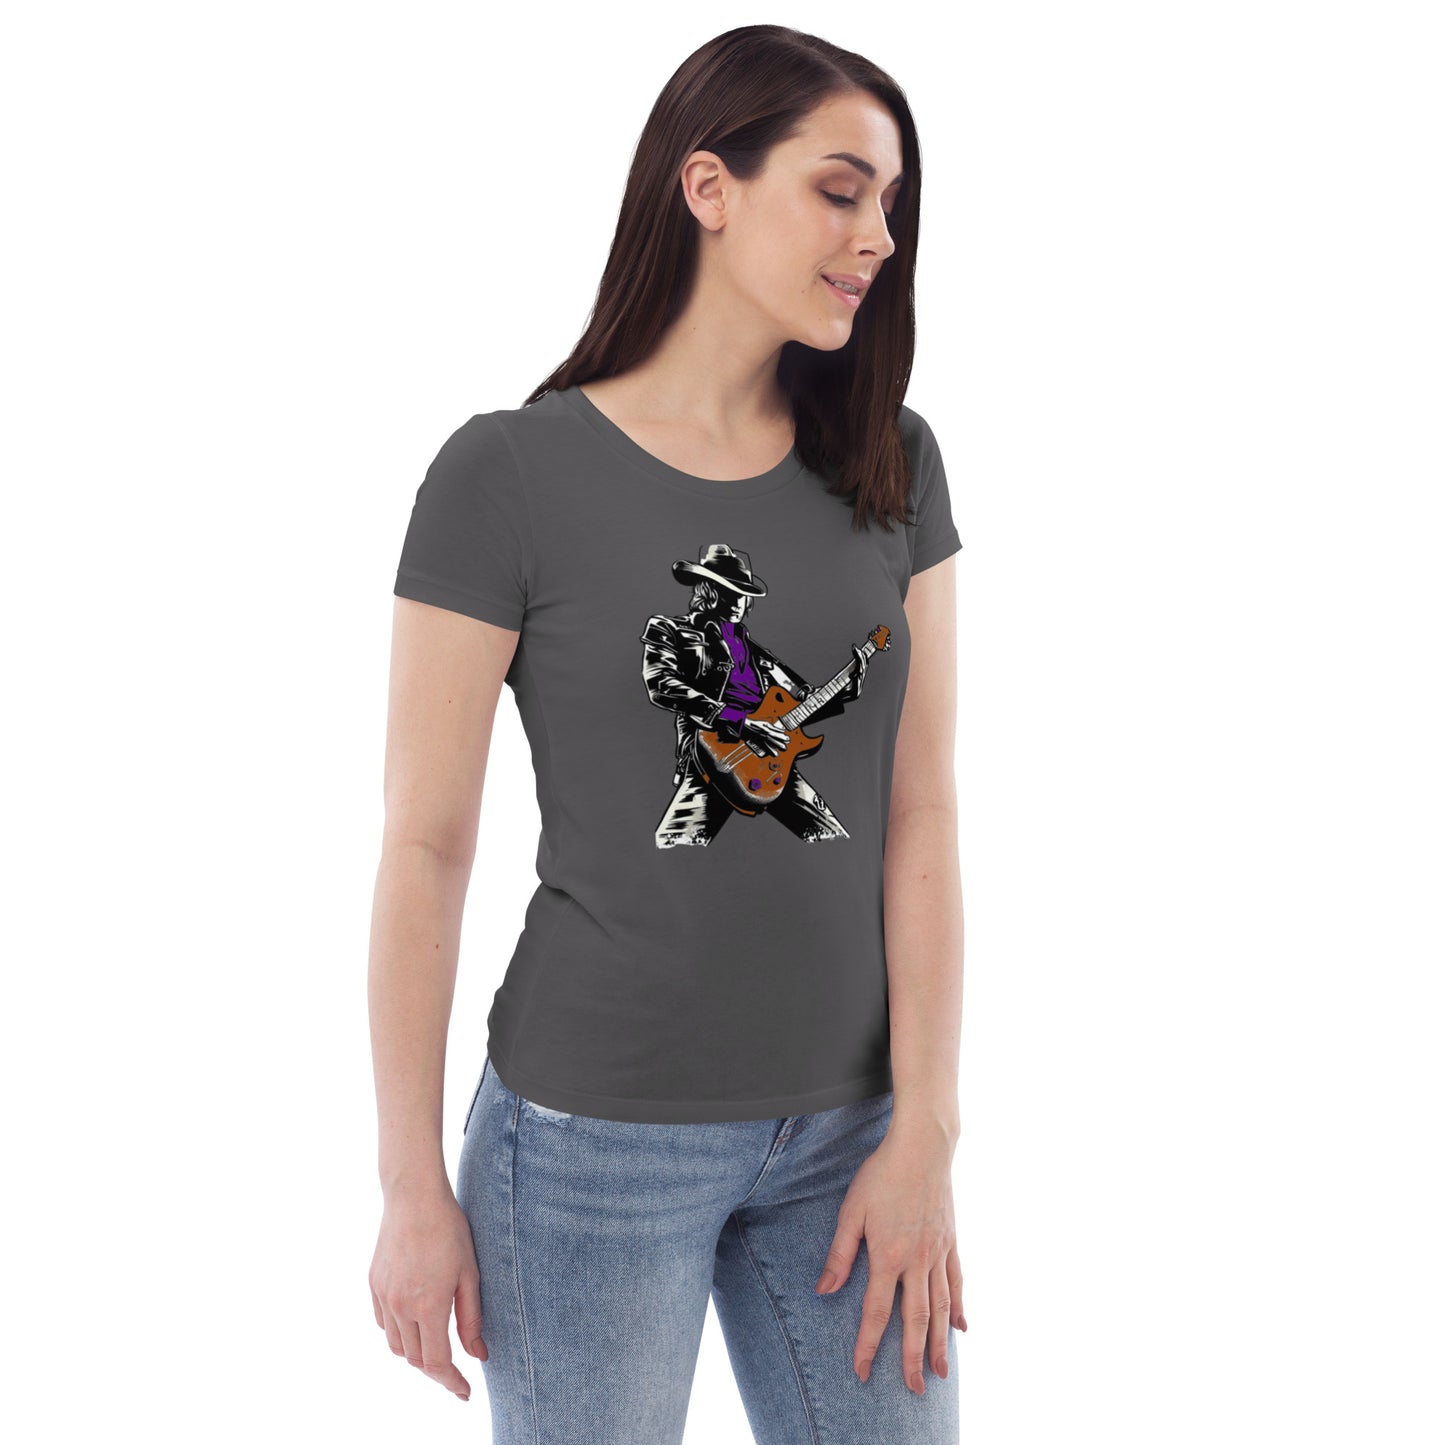 Soul Player Women's Fitted Eco Tee